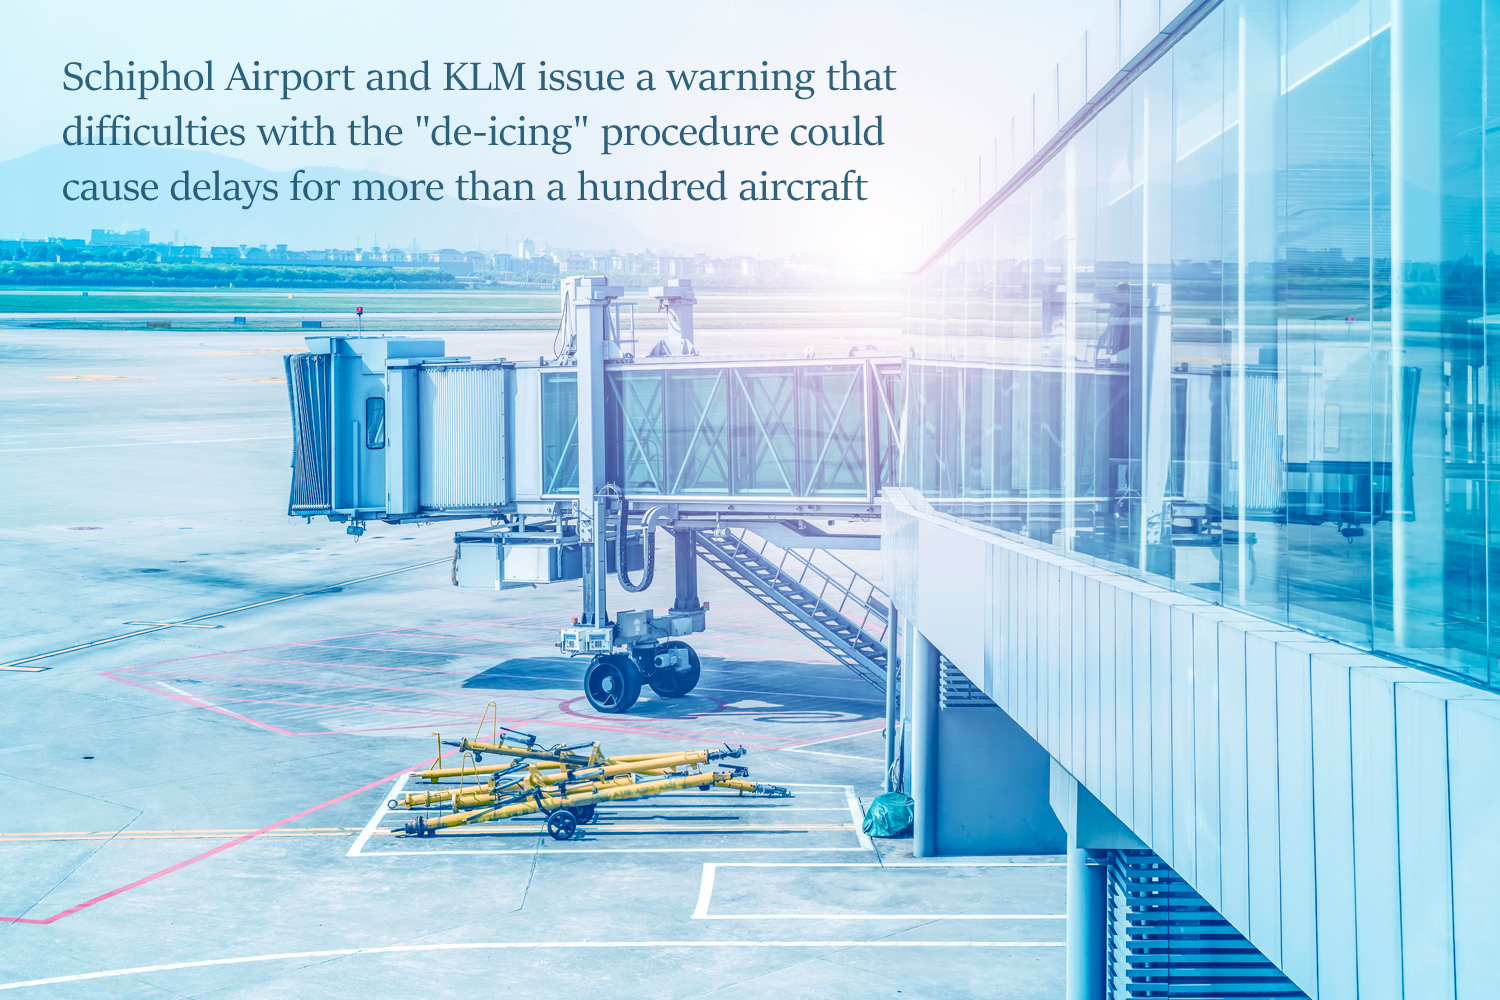 Schiphol Airport and KLM issue a warning that difficulties with the 